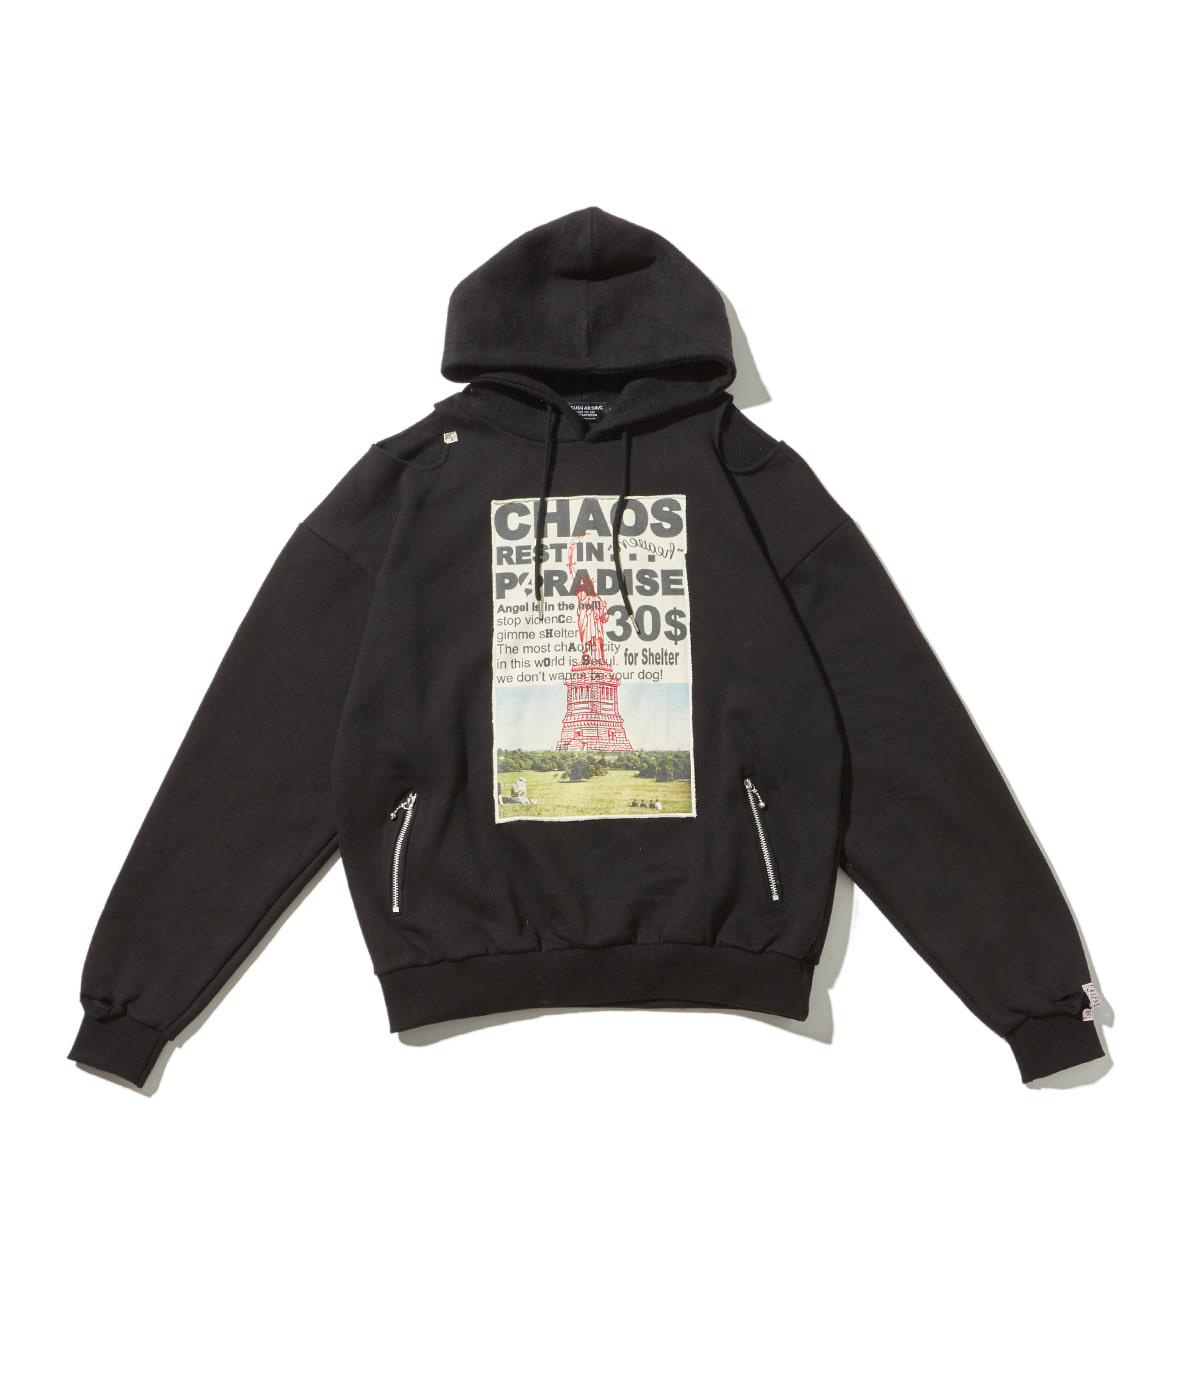 Patched &amp; Inside-out hoodie (Black)